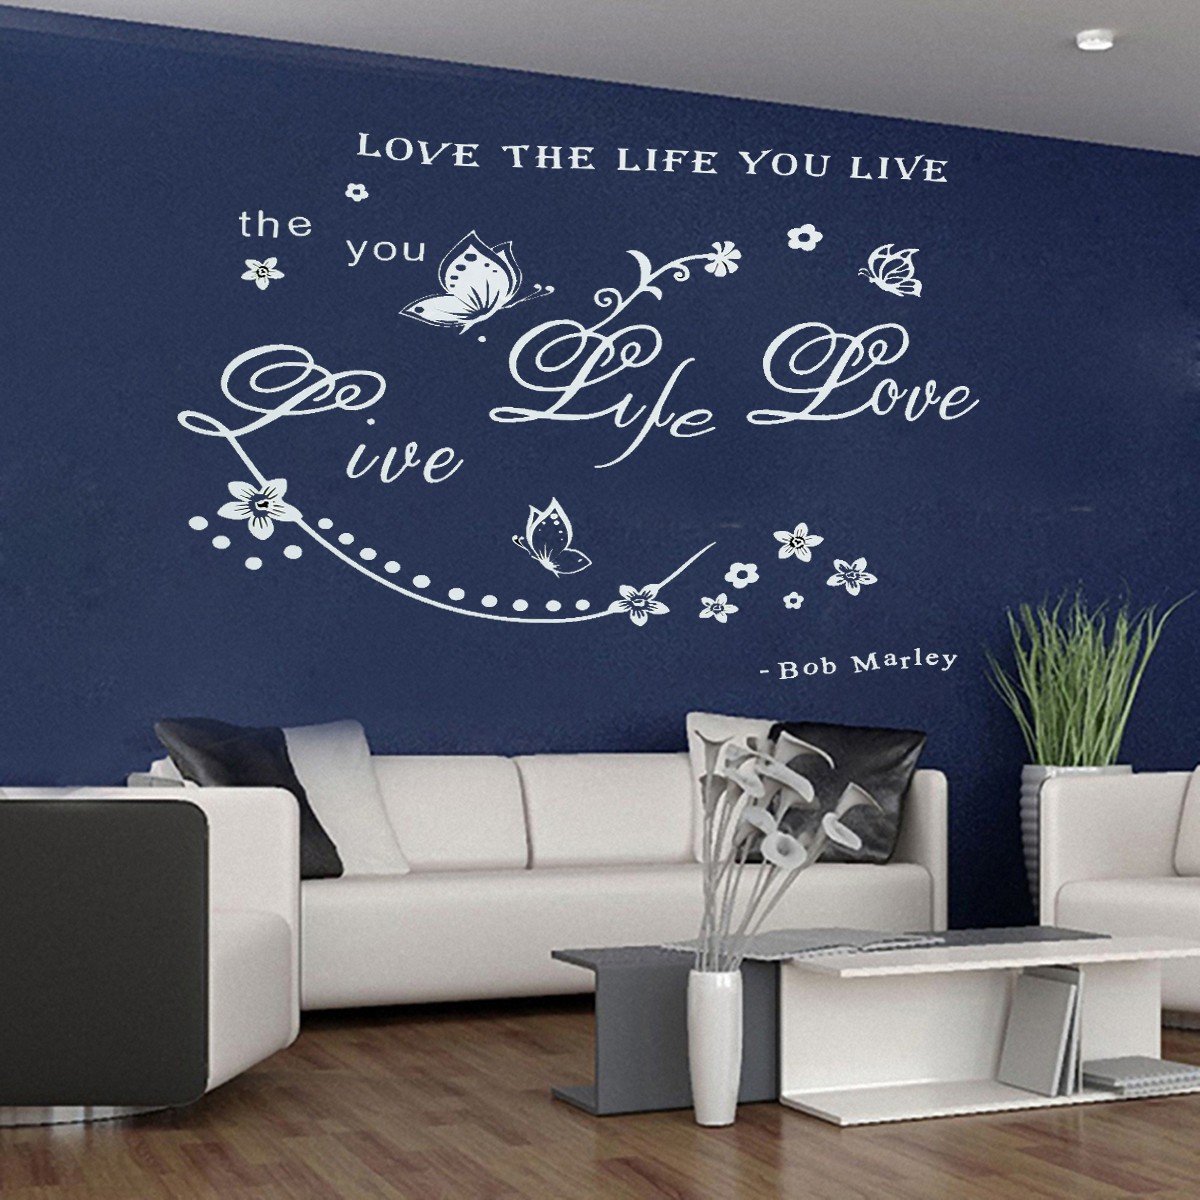 Removable-Wall-Sticker-Art-Decals-For-Home-Kitchen-Living-Room-Bedroom-Bathroom-Office-Decor-Water-R-1722049-2